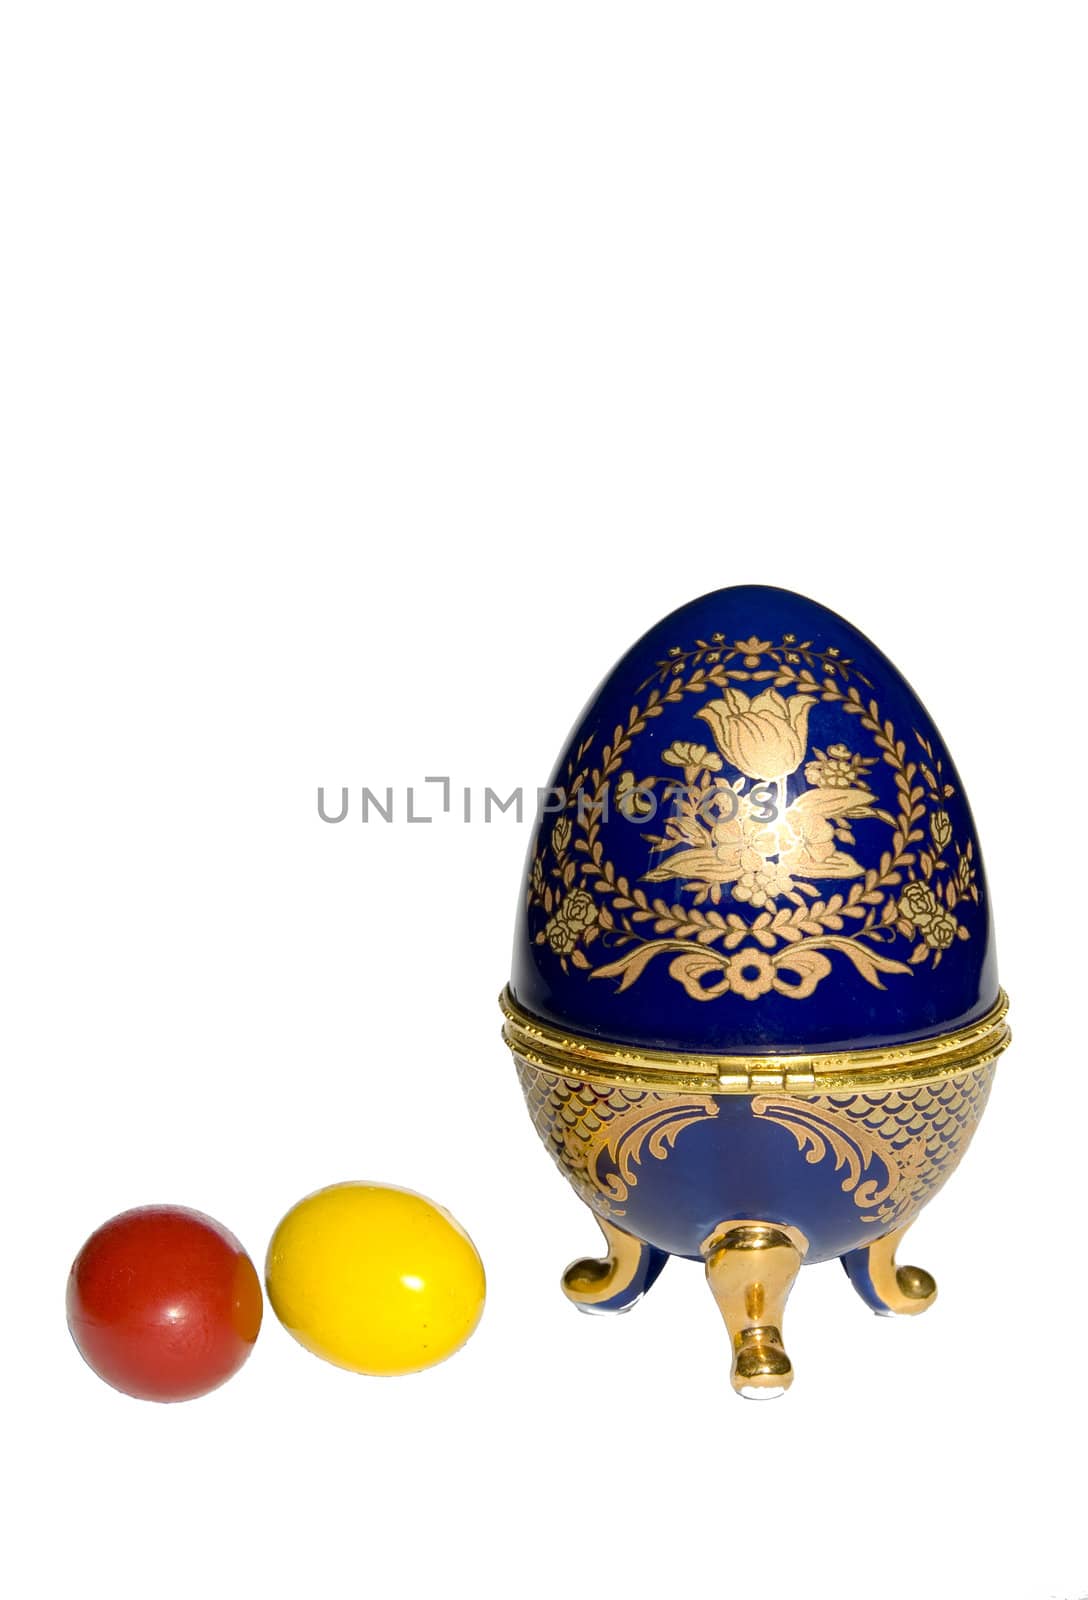 Colored Easter eggs near Faberge egg copy isolated on a white background